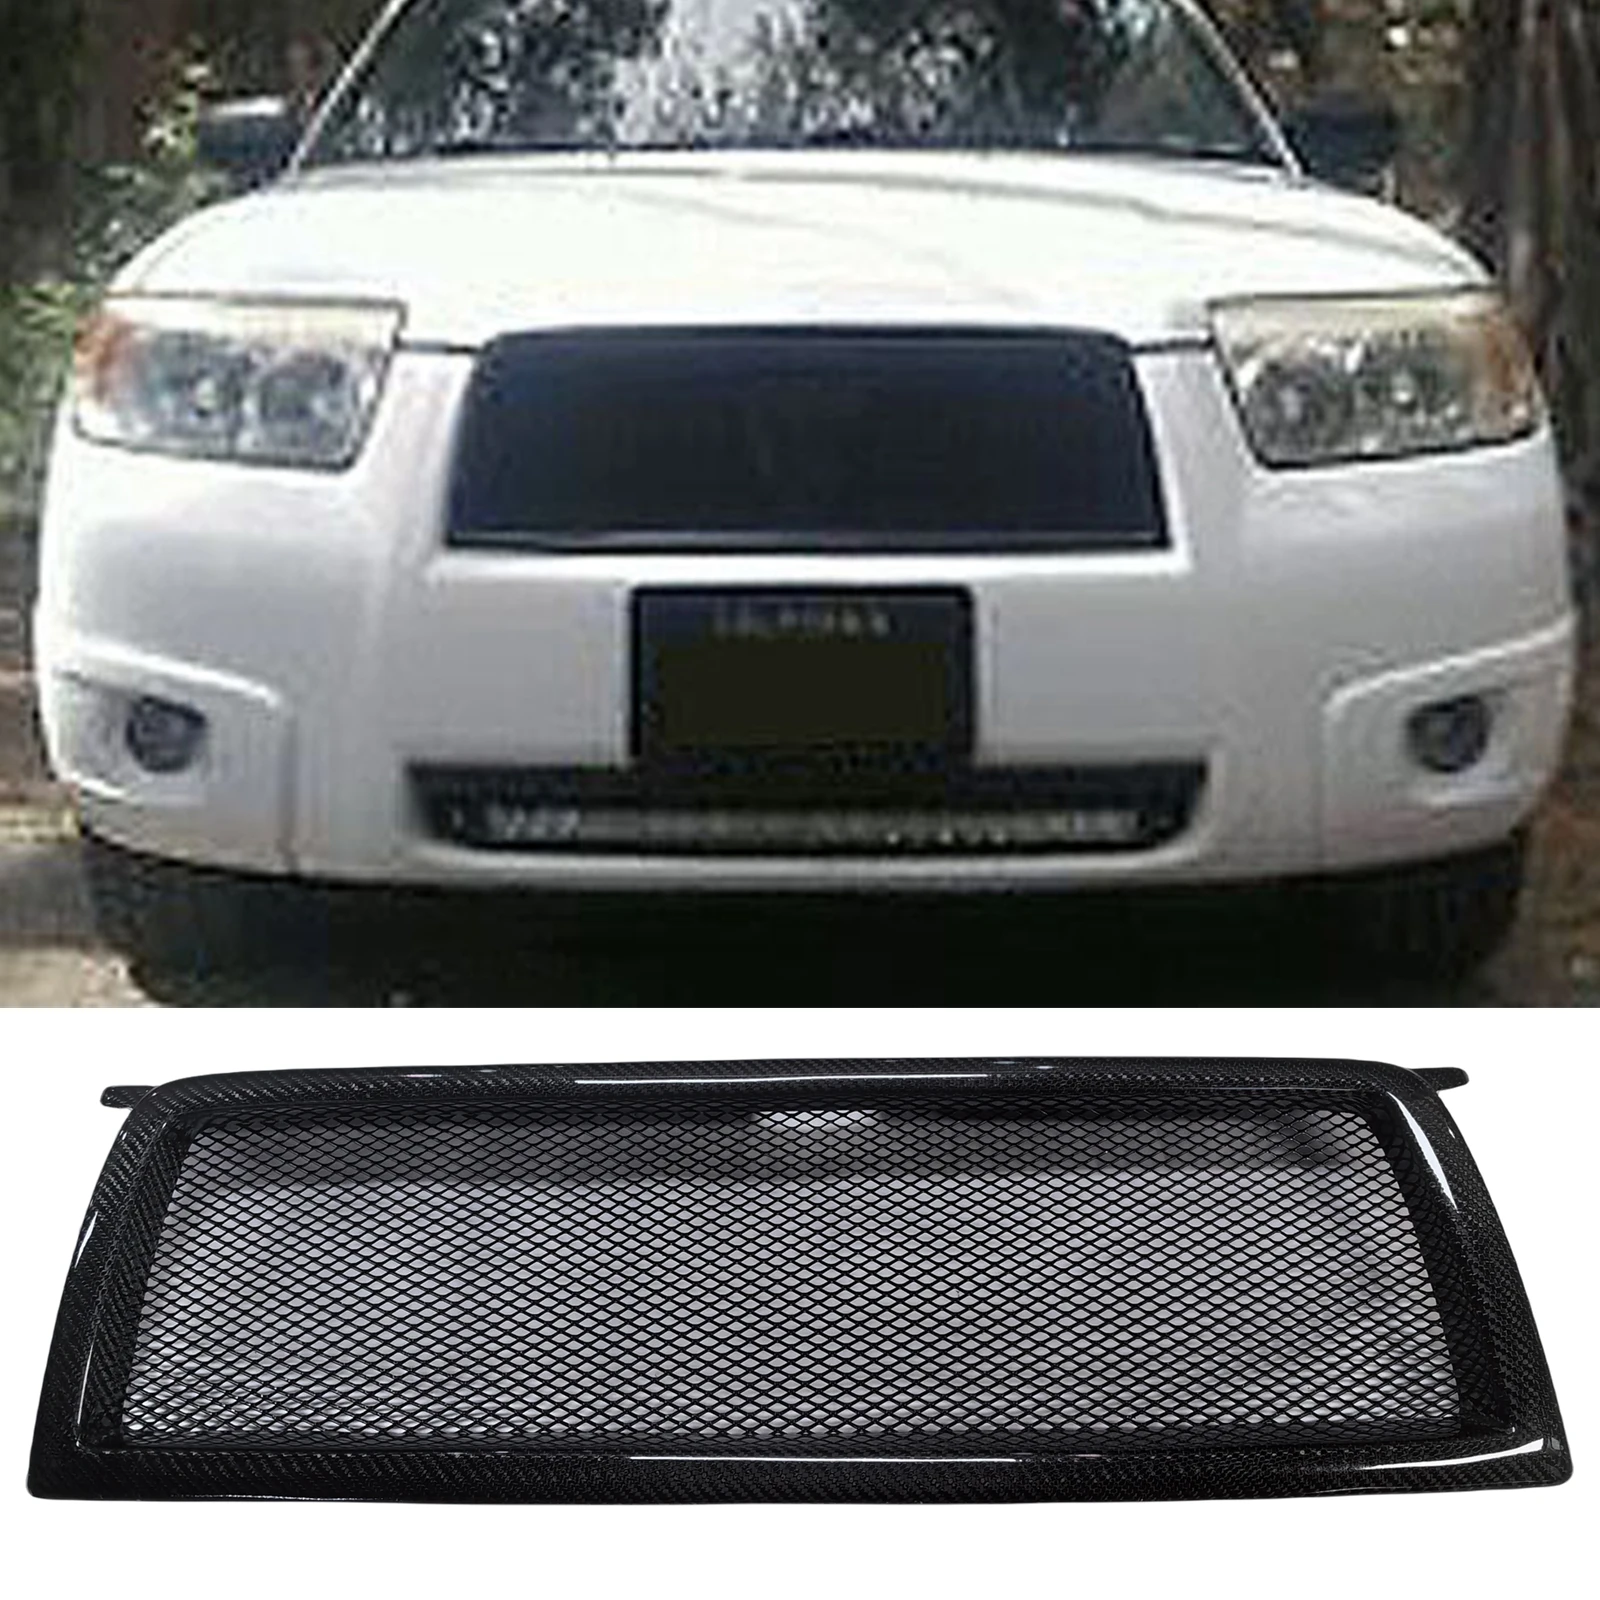 

Racing Grill Front Grille For Subaru Forester 2006 2007 2008 Honeycomb Style Real Carbon Fiber/Fiberglass Upper Bumper Hood Mesh